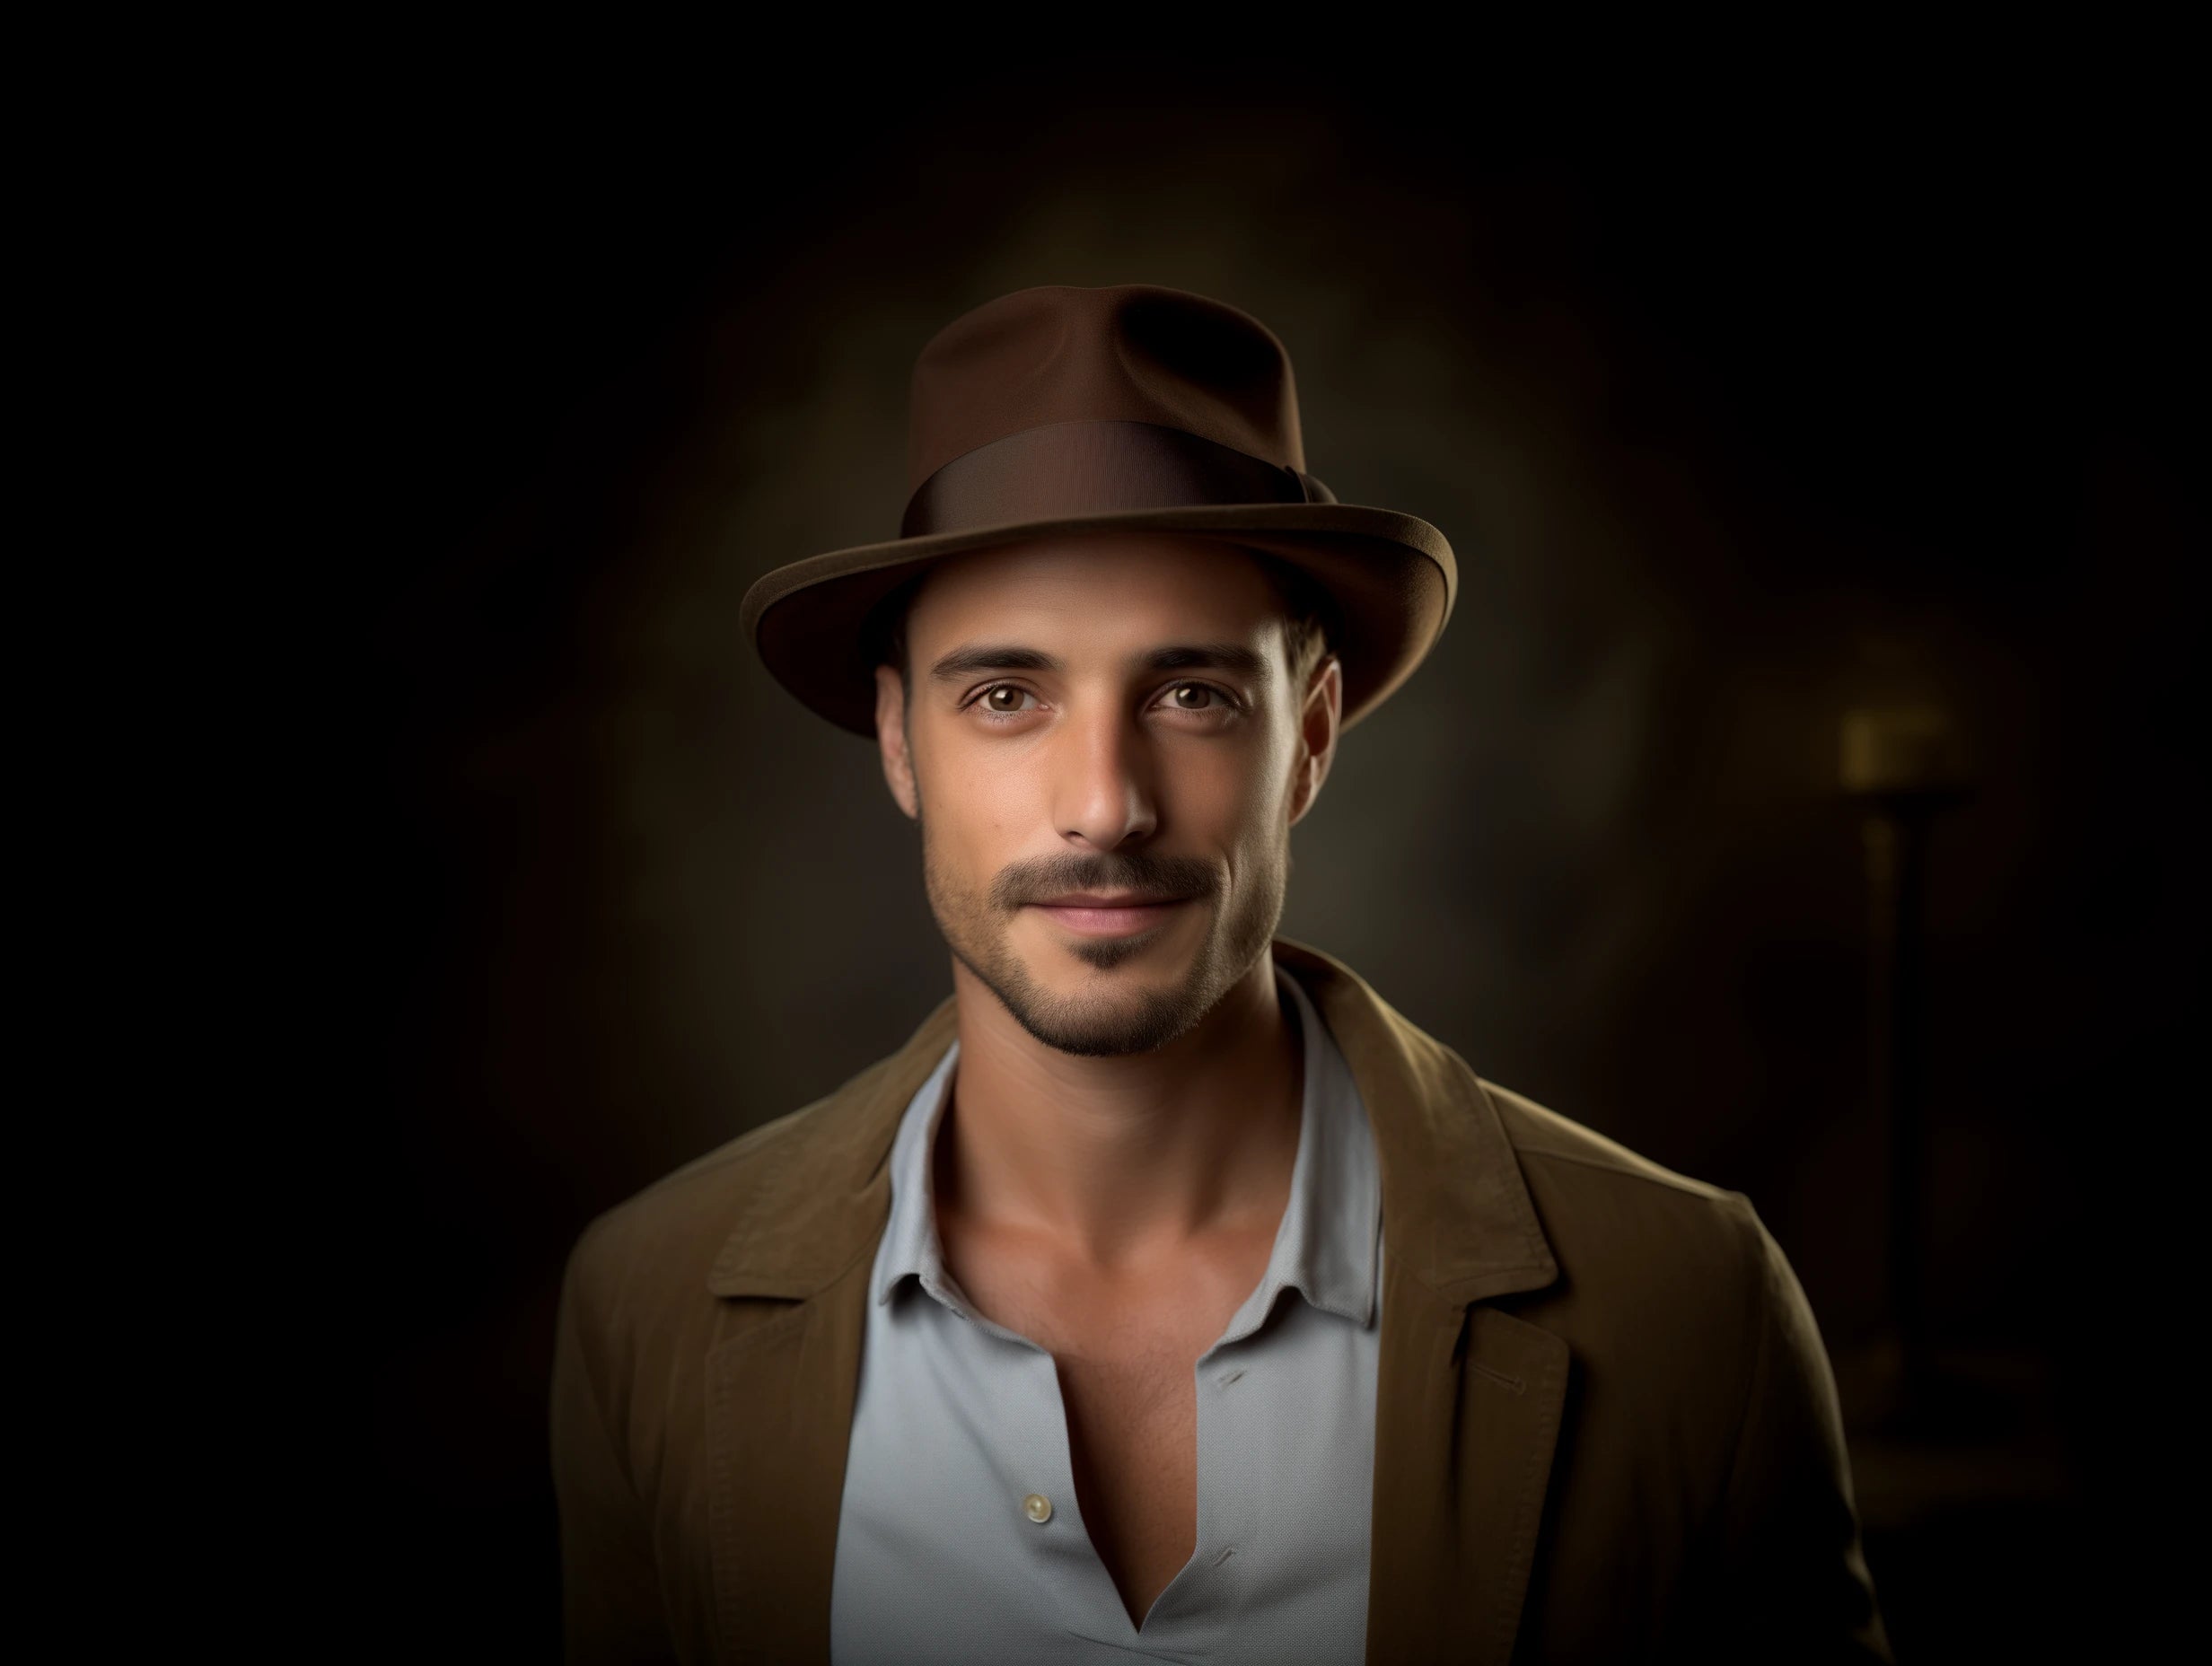 A close-up portrait of a confident man wearing a brown Agnoulita Tony fedora hat and a jacket. He has a slight stubble, piercing eyes, and a gentle smile. The background is dimly lit with hints of rustic decor, including a subtle silhouette of a lamp.